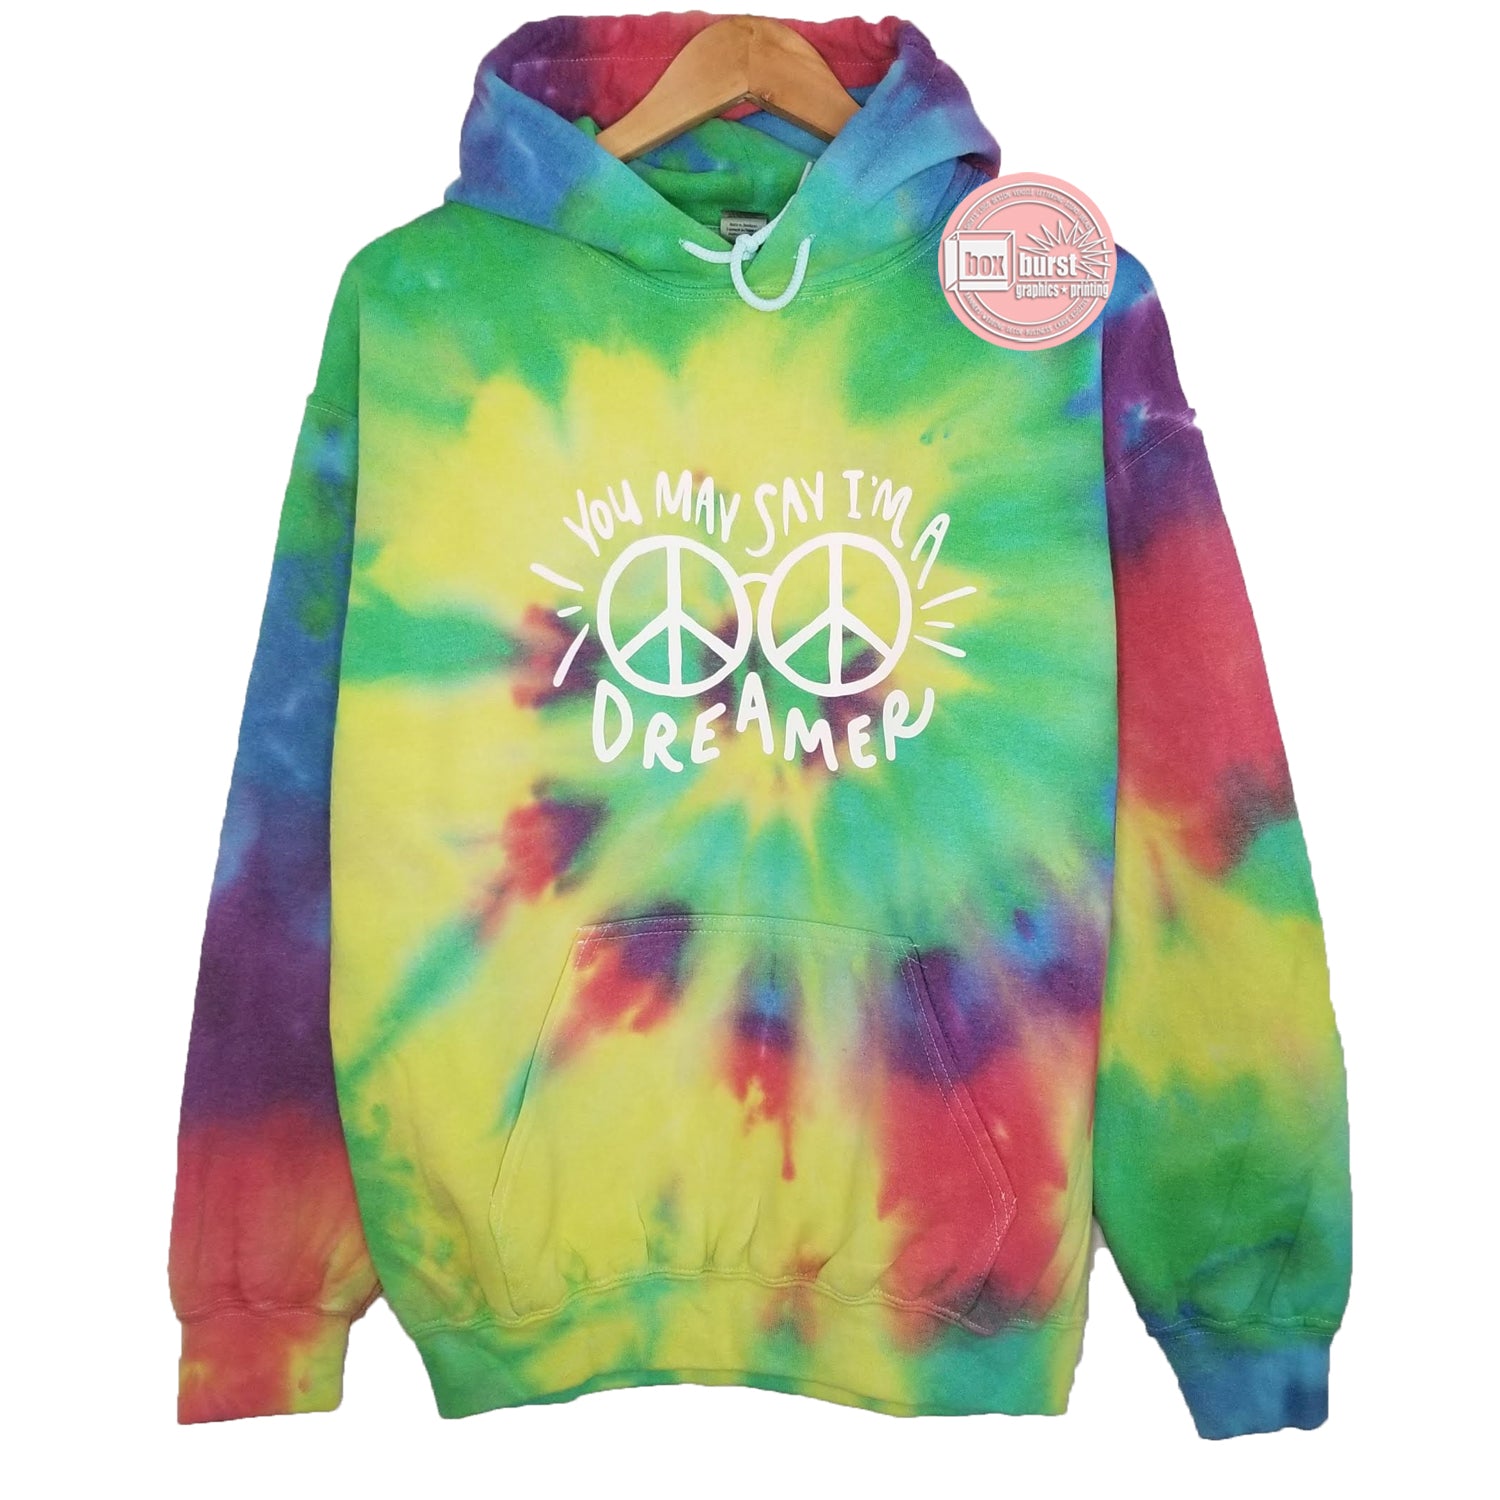 You may say i'm a dreamer tie dye unisex hoodie